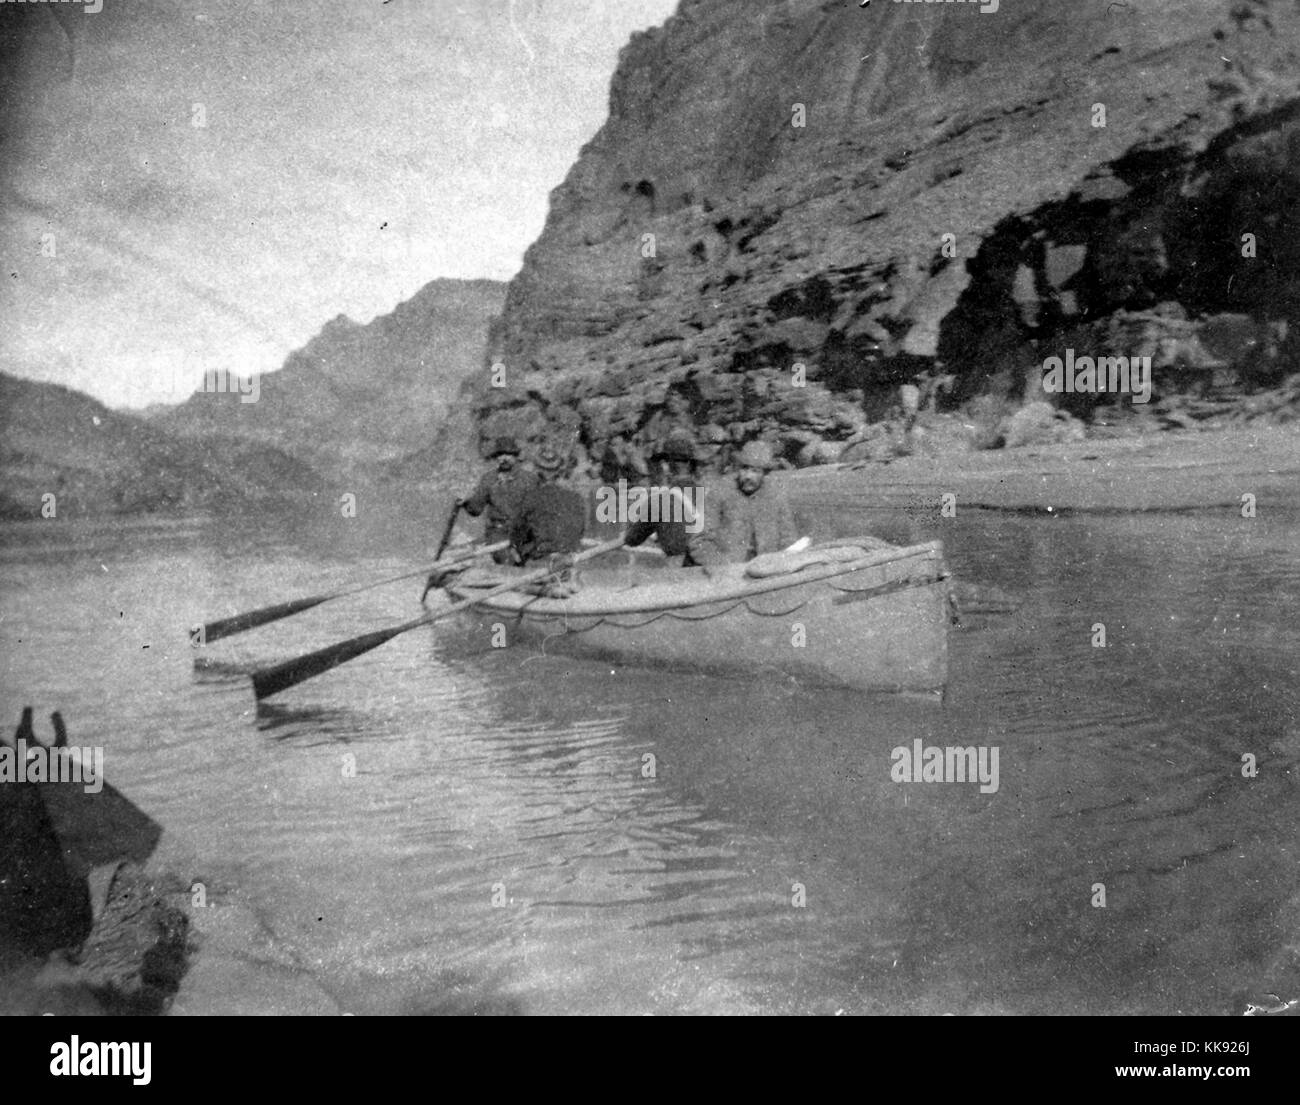 A photograph of a group of four men traveling by row boat through the Grand Canyon, they are located just below a section of the Colorado River known as Paria Riffle, Arizona, 1905. From the New York Public Library. Stock Photo